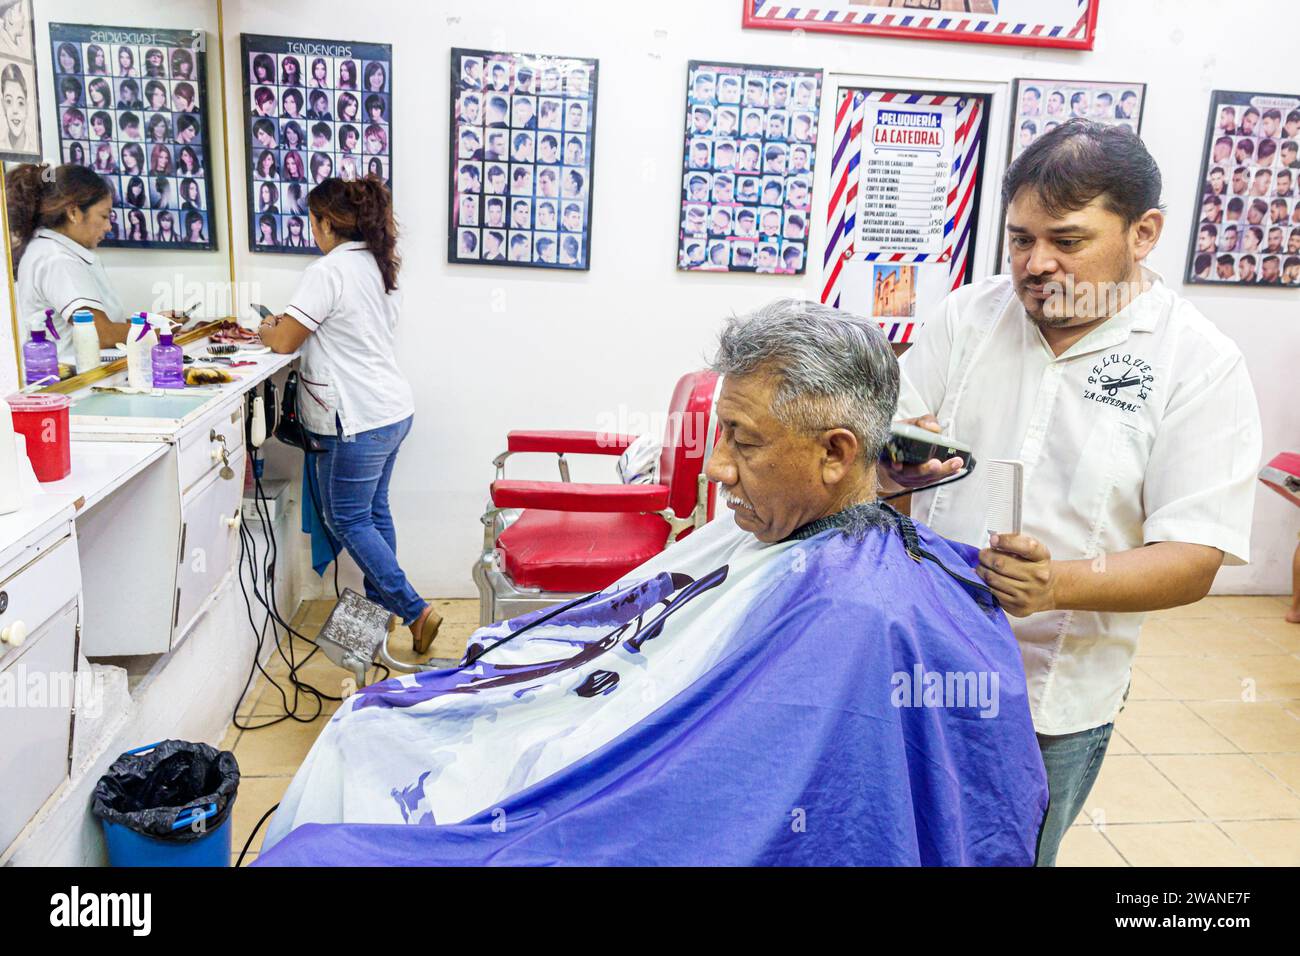 Merida Mexico,centro historico central historic district,barber barbershop getting haircut,man men male,woman women lady female,adults residents,insid Stock Photo